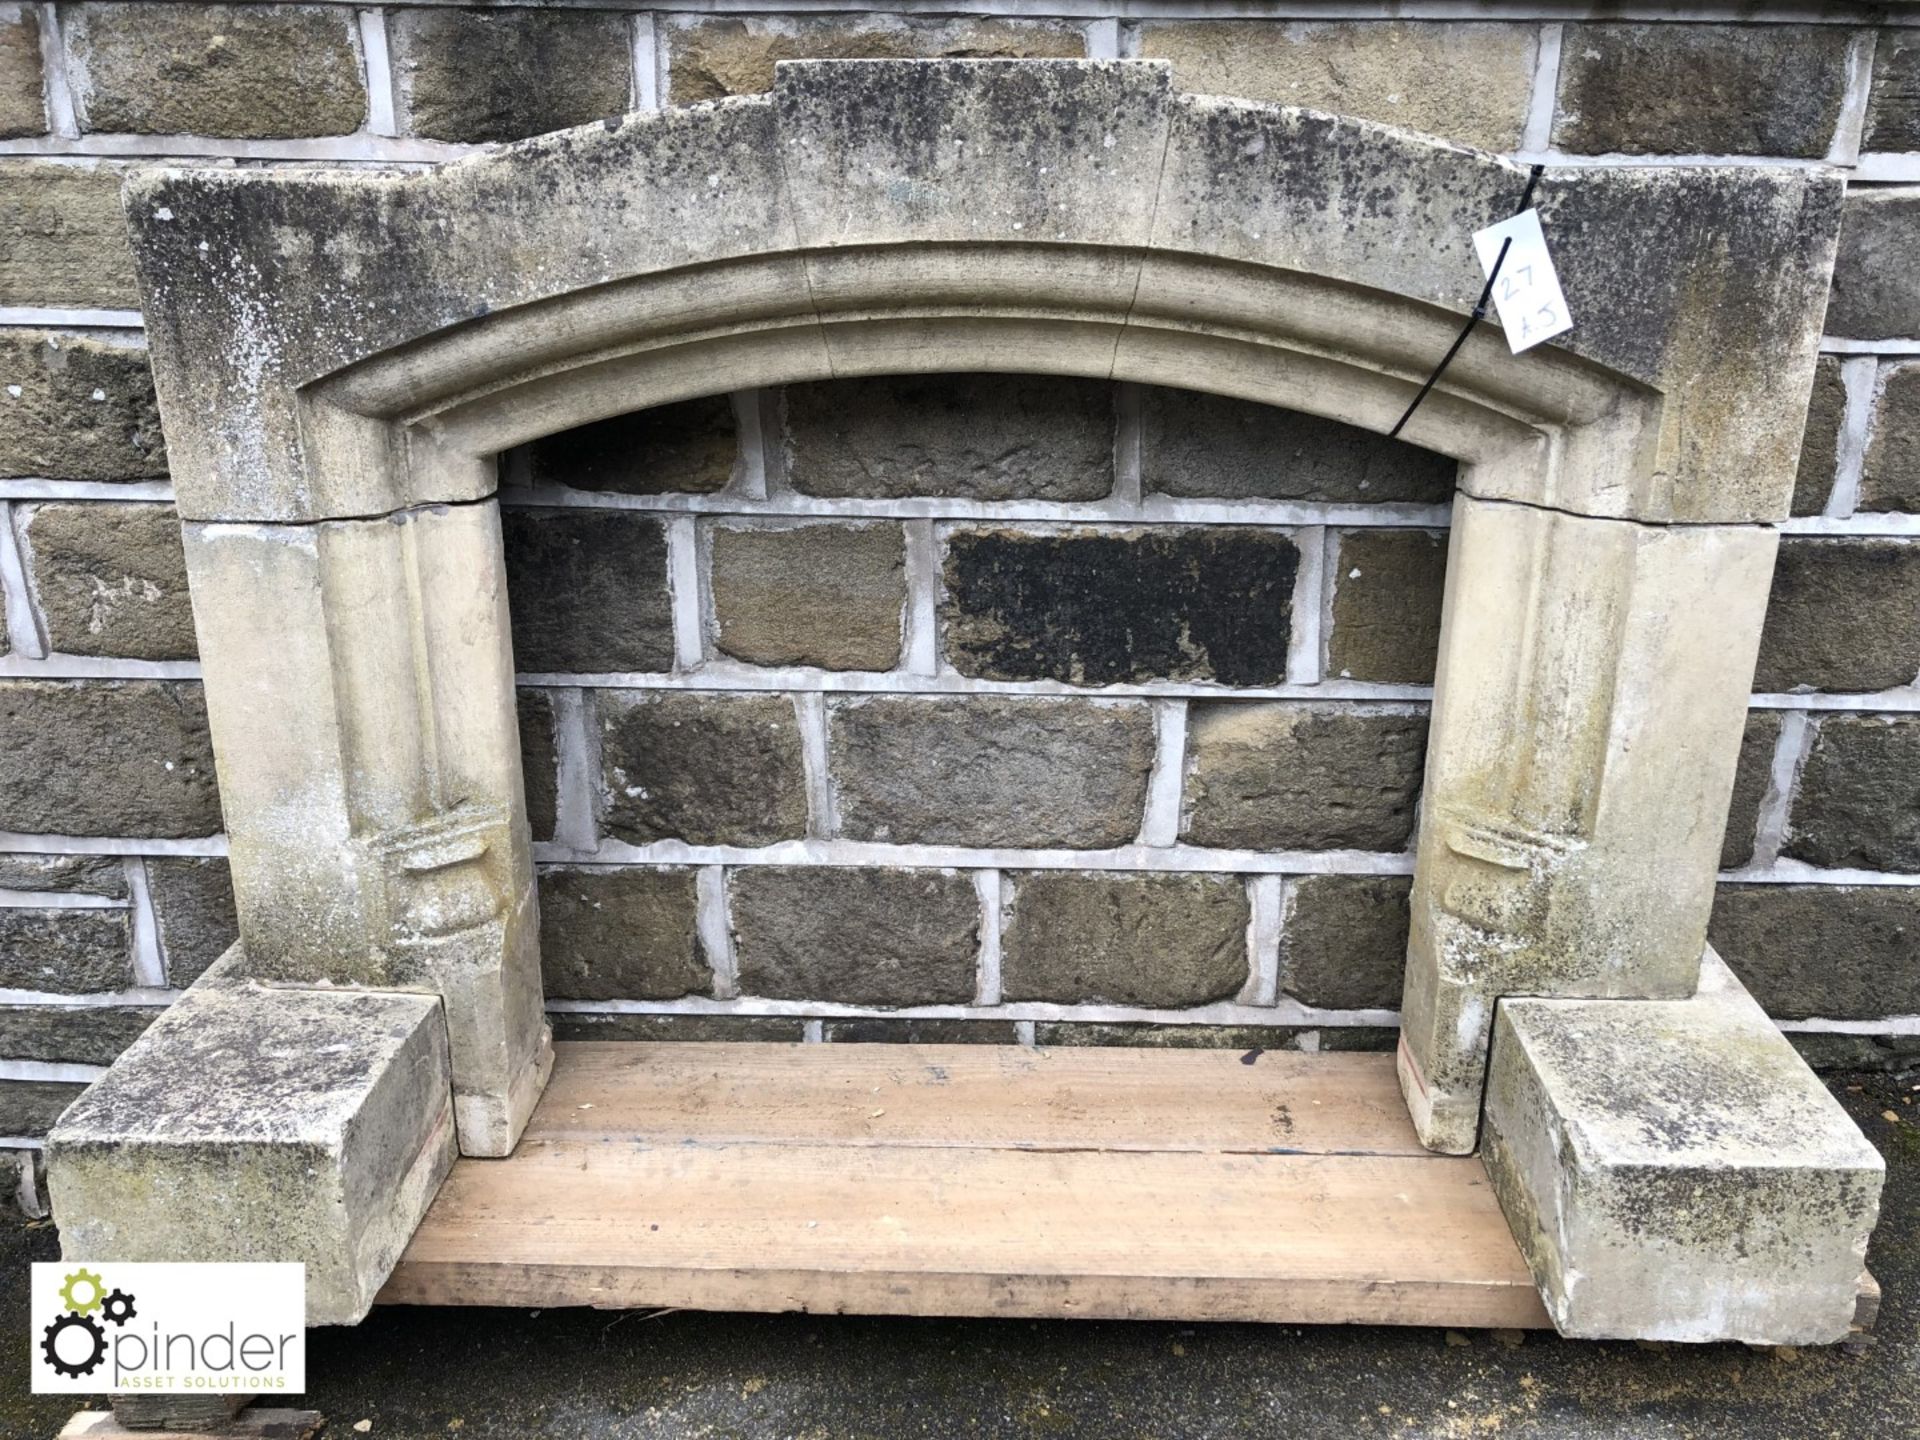 1920’s Minster Stone Fireplace, 1330mm wide x 980mm tall